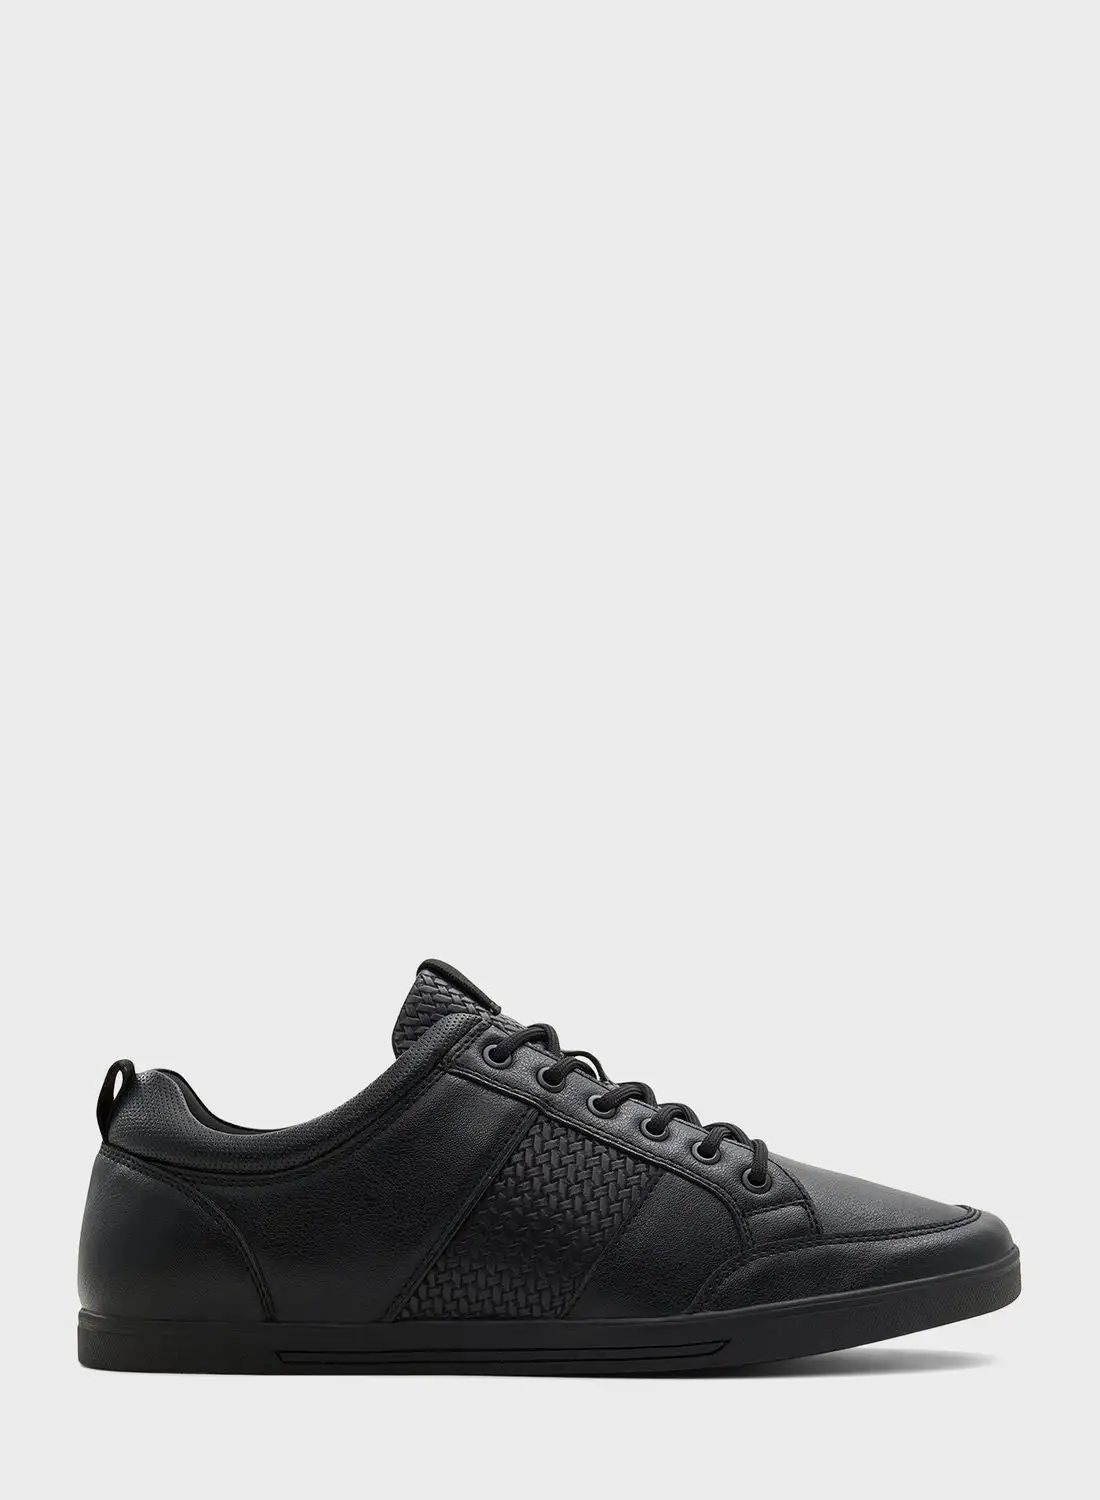 CALL IT SPRING Chalmers Casual Sneakers